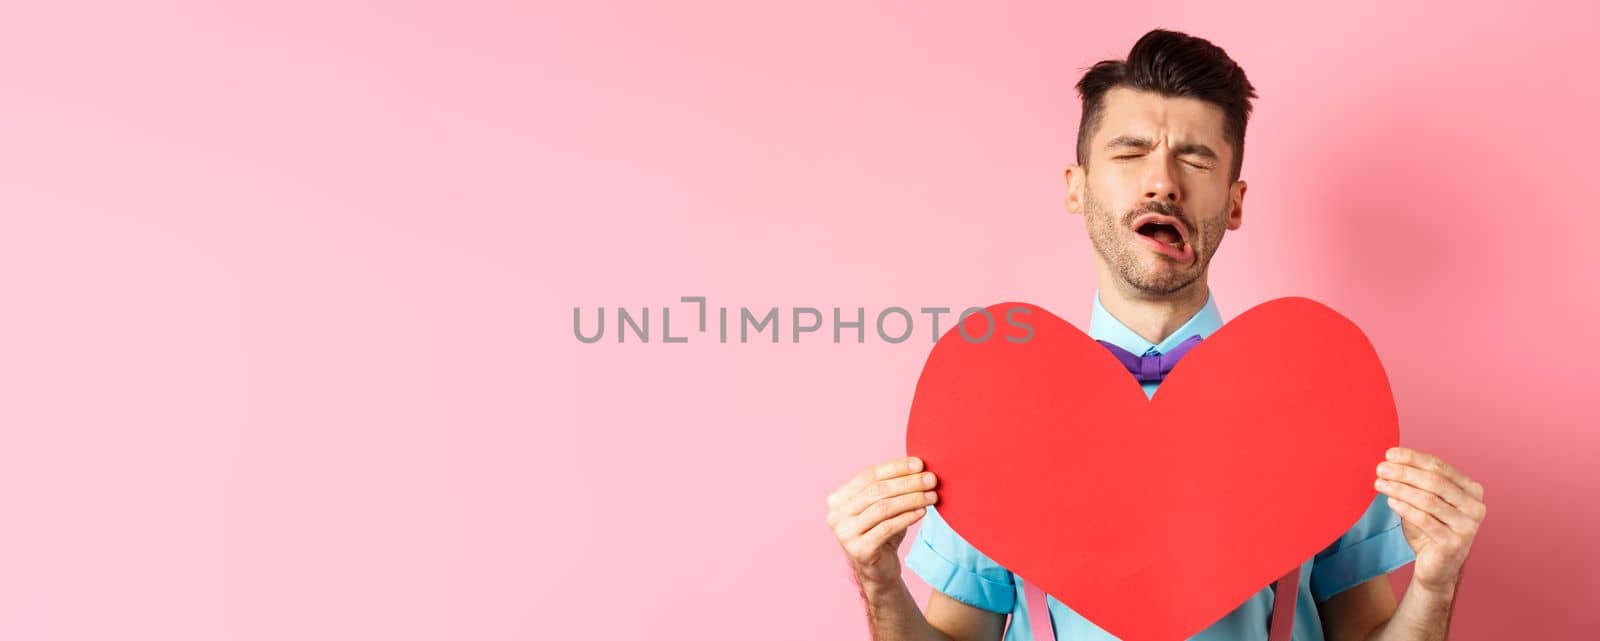 Valentines day concept. Sad and lonely man feeling heartbroken, being rejected, showing big red heart cutout and crying from break-up, standing on pink background.